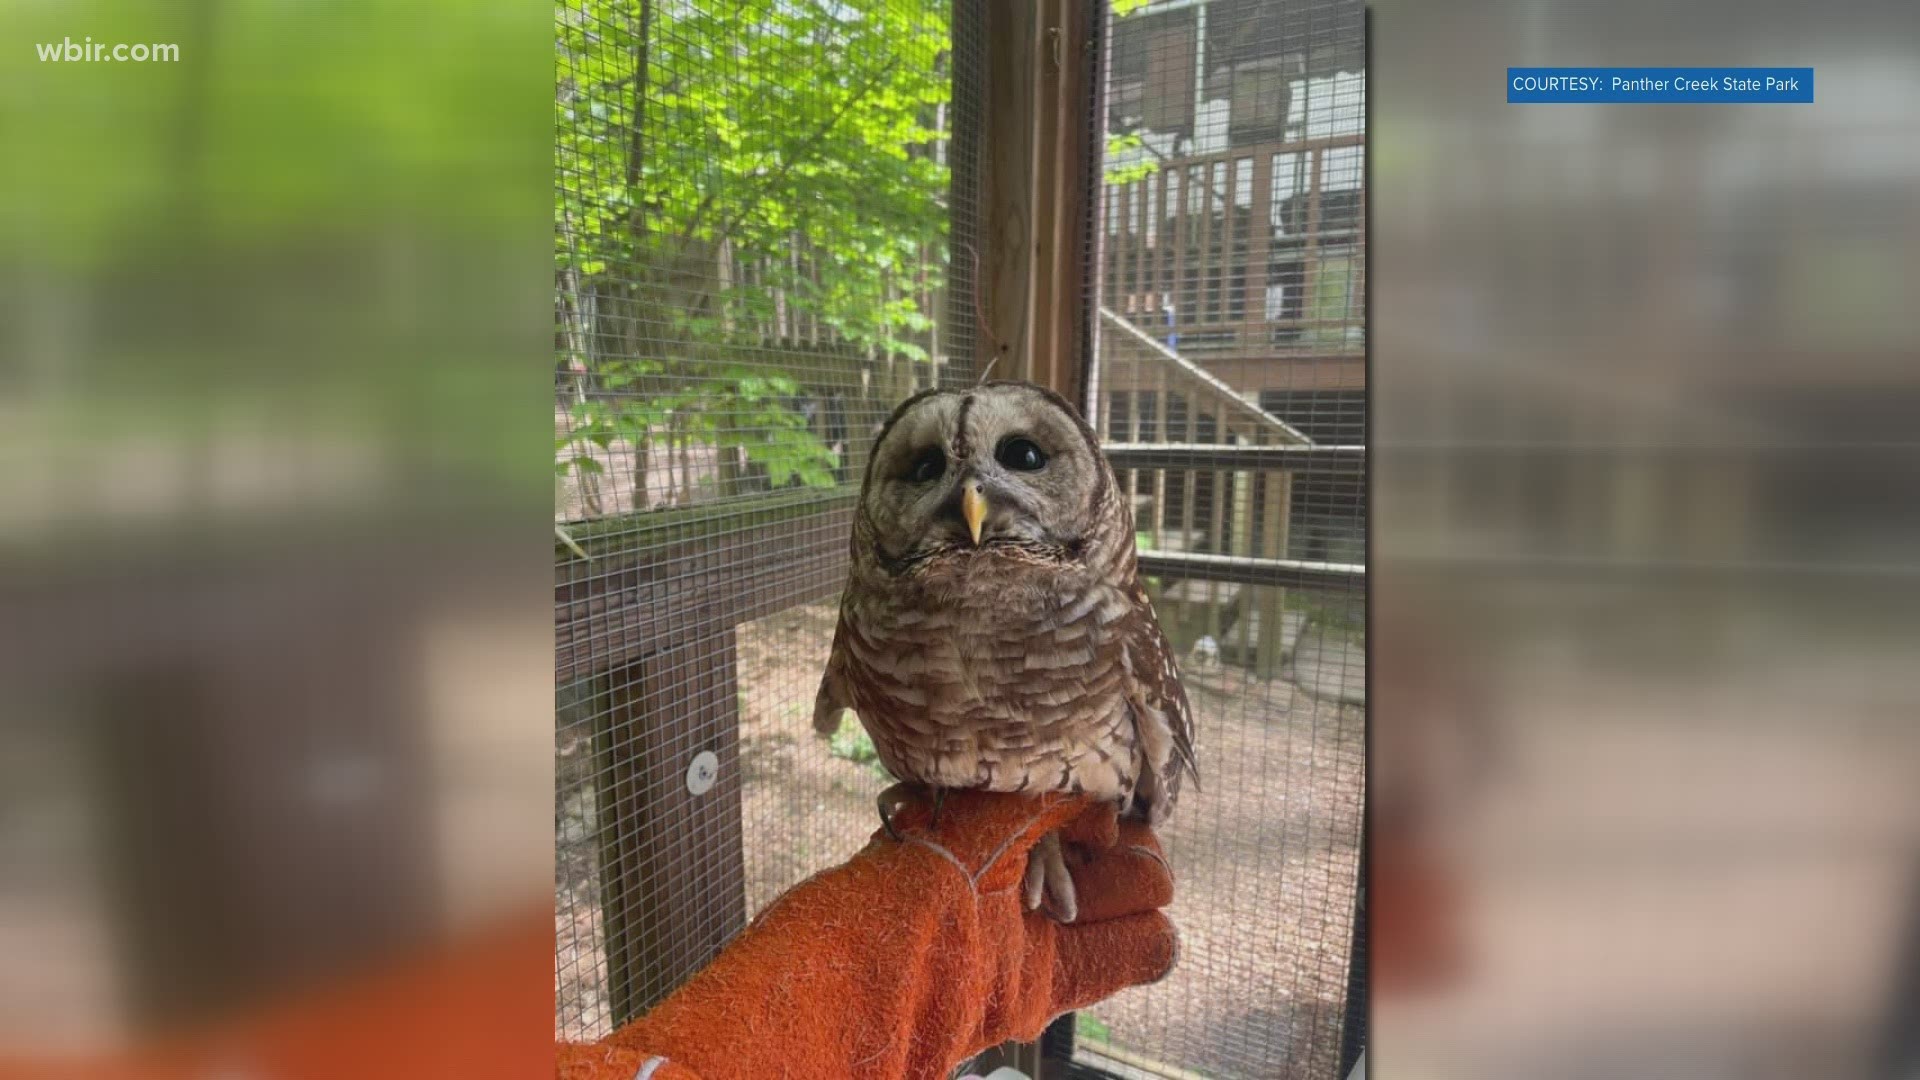 The 2-year-old barred owl was rescued in Maynardville after an accident that left him permanently blind in one eye. He can't be released into the wild.